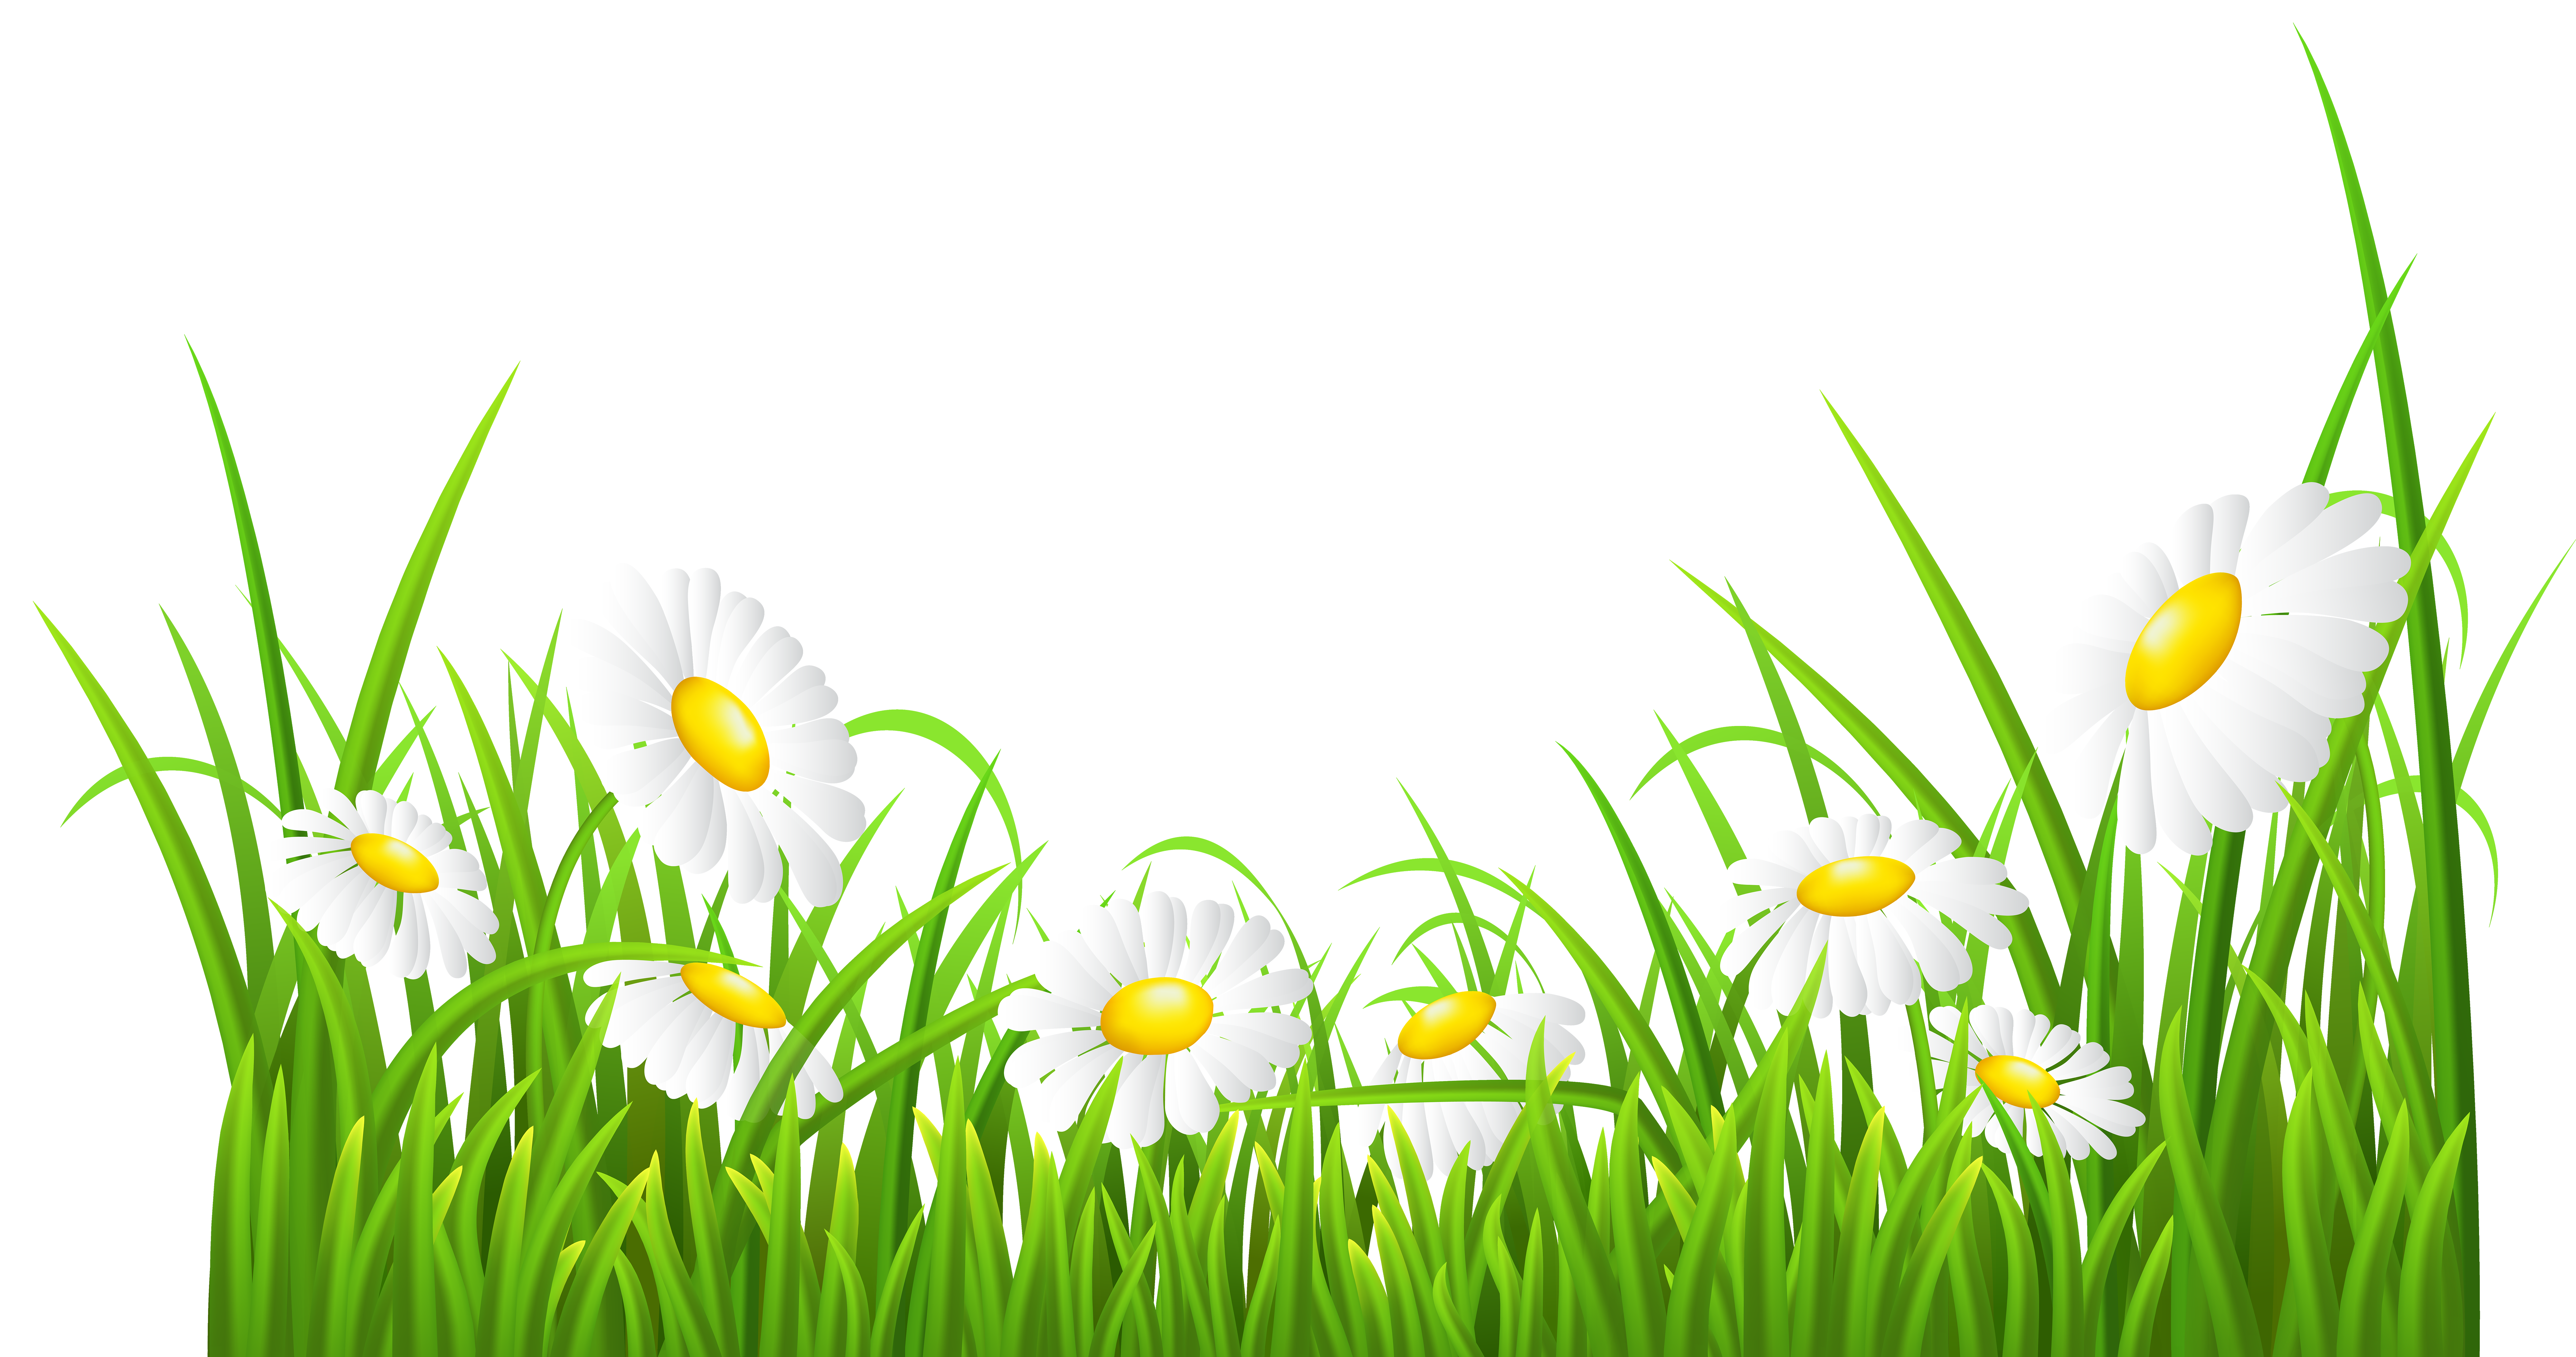 Mushrooms clipart scenery. White daisies and grass